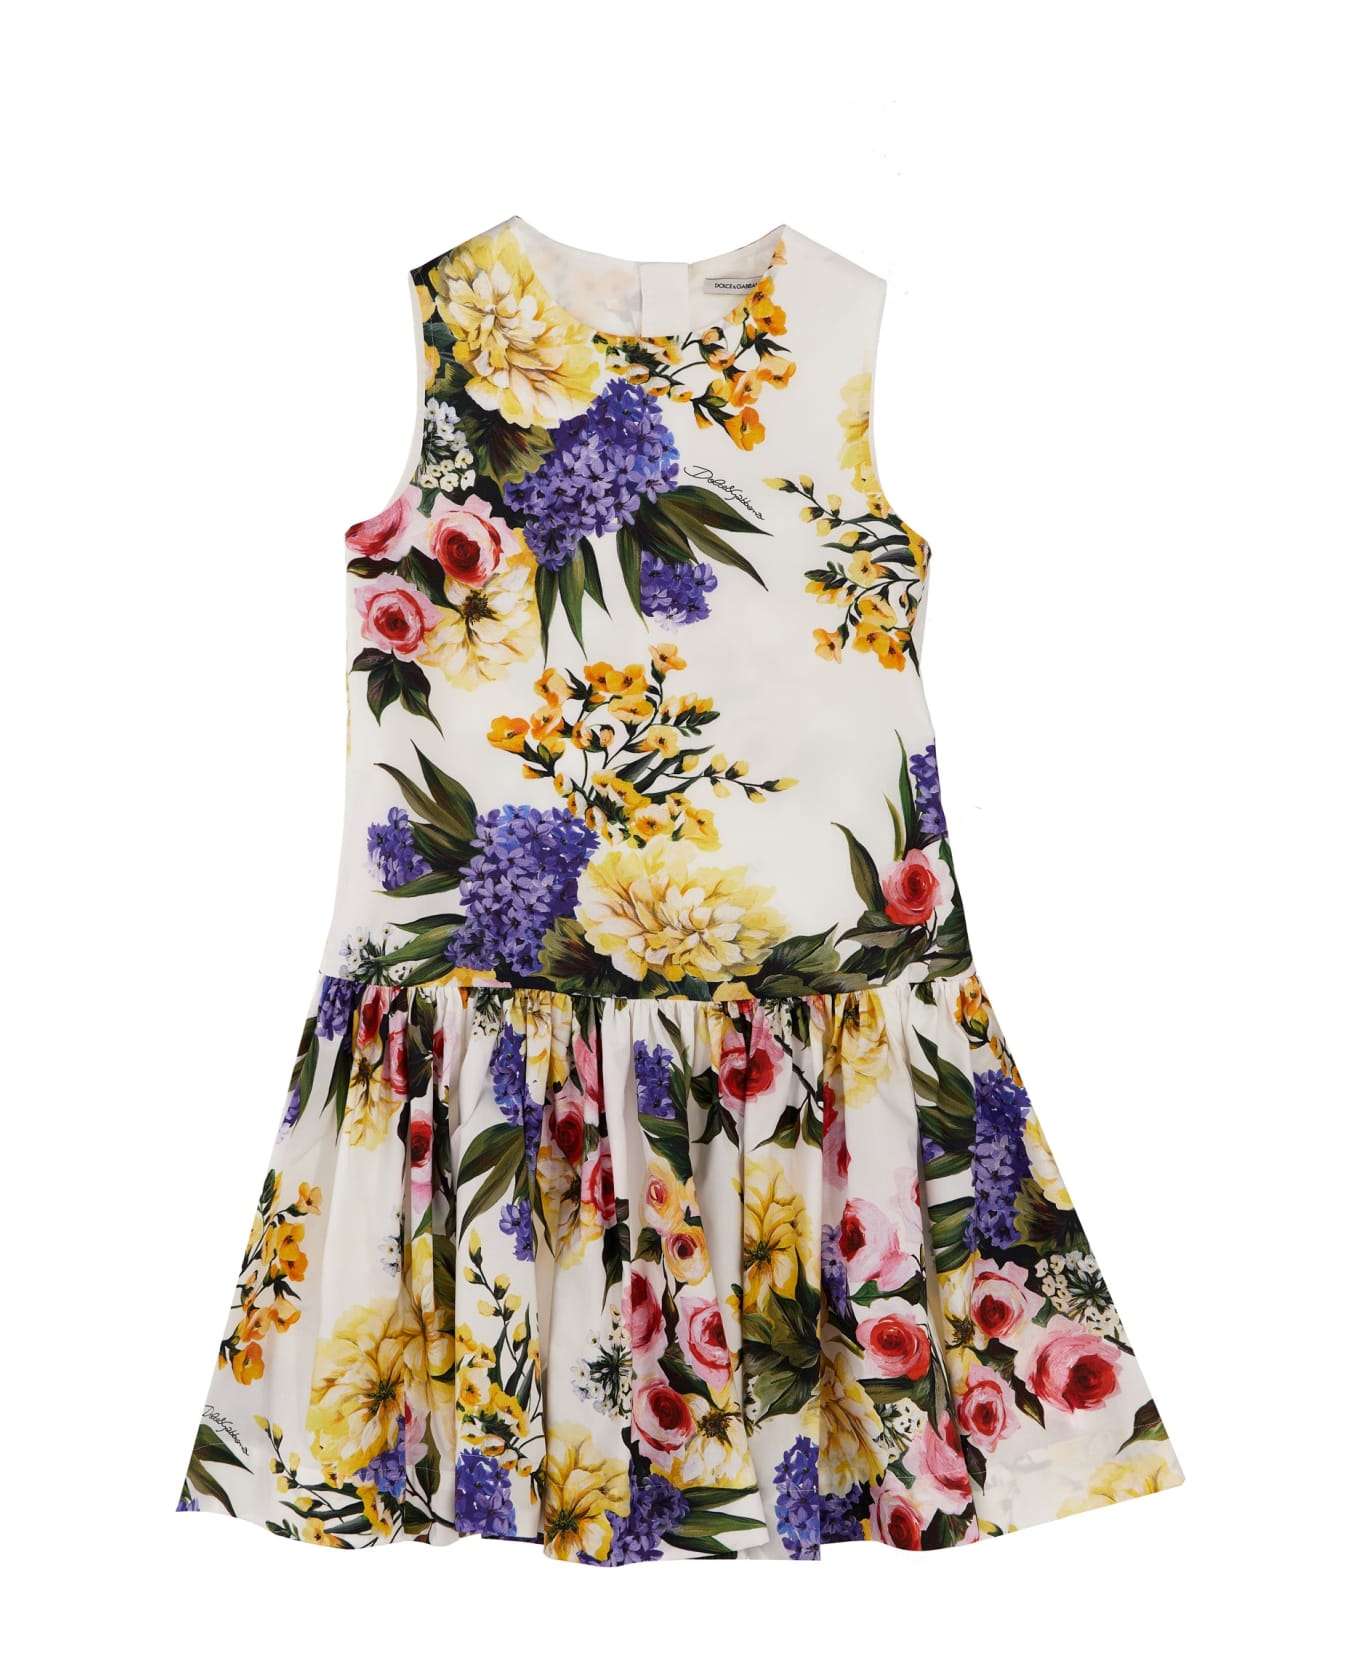 dolce chunky & Gabbana Floral Printed Dress - Multicolor